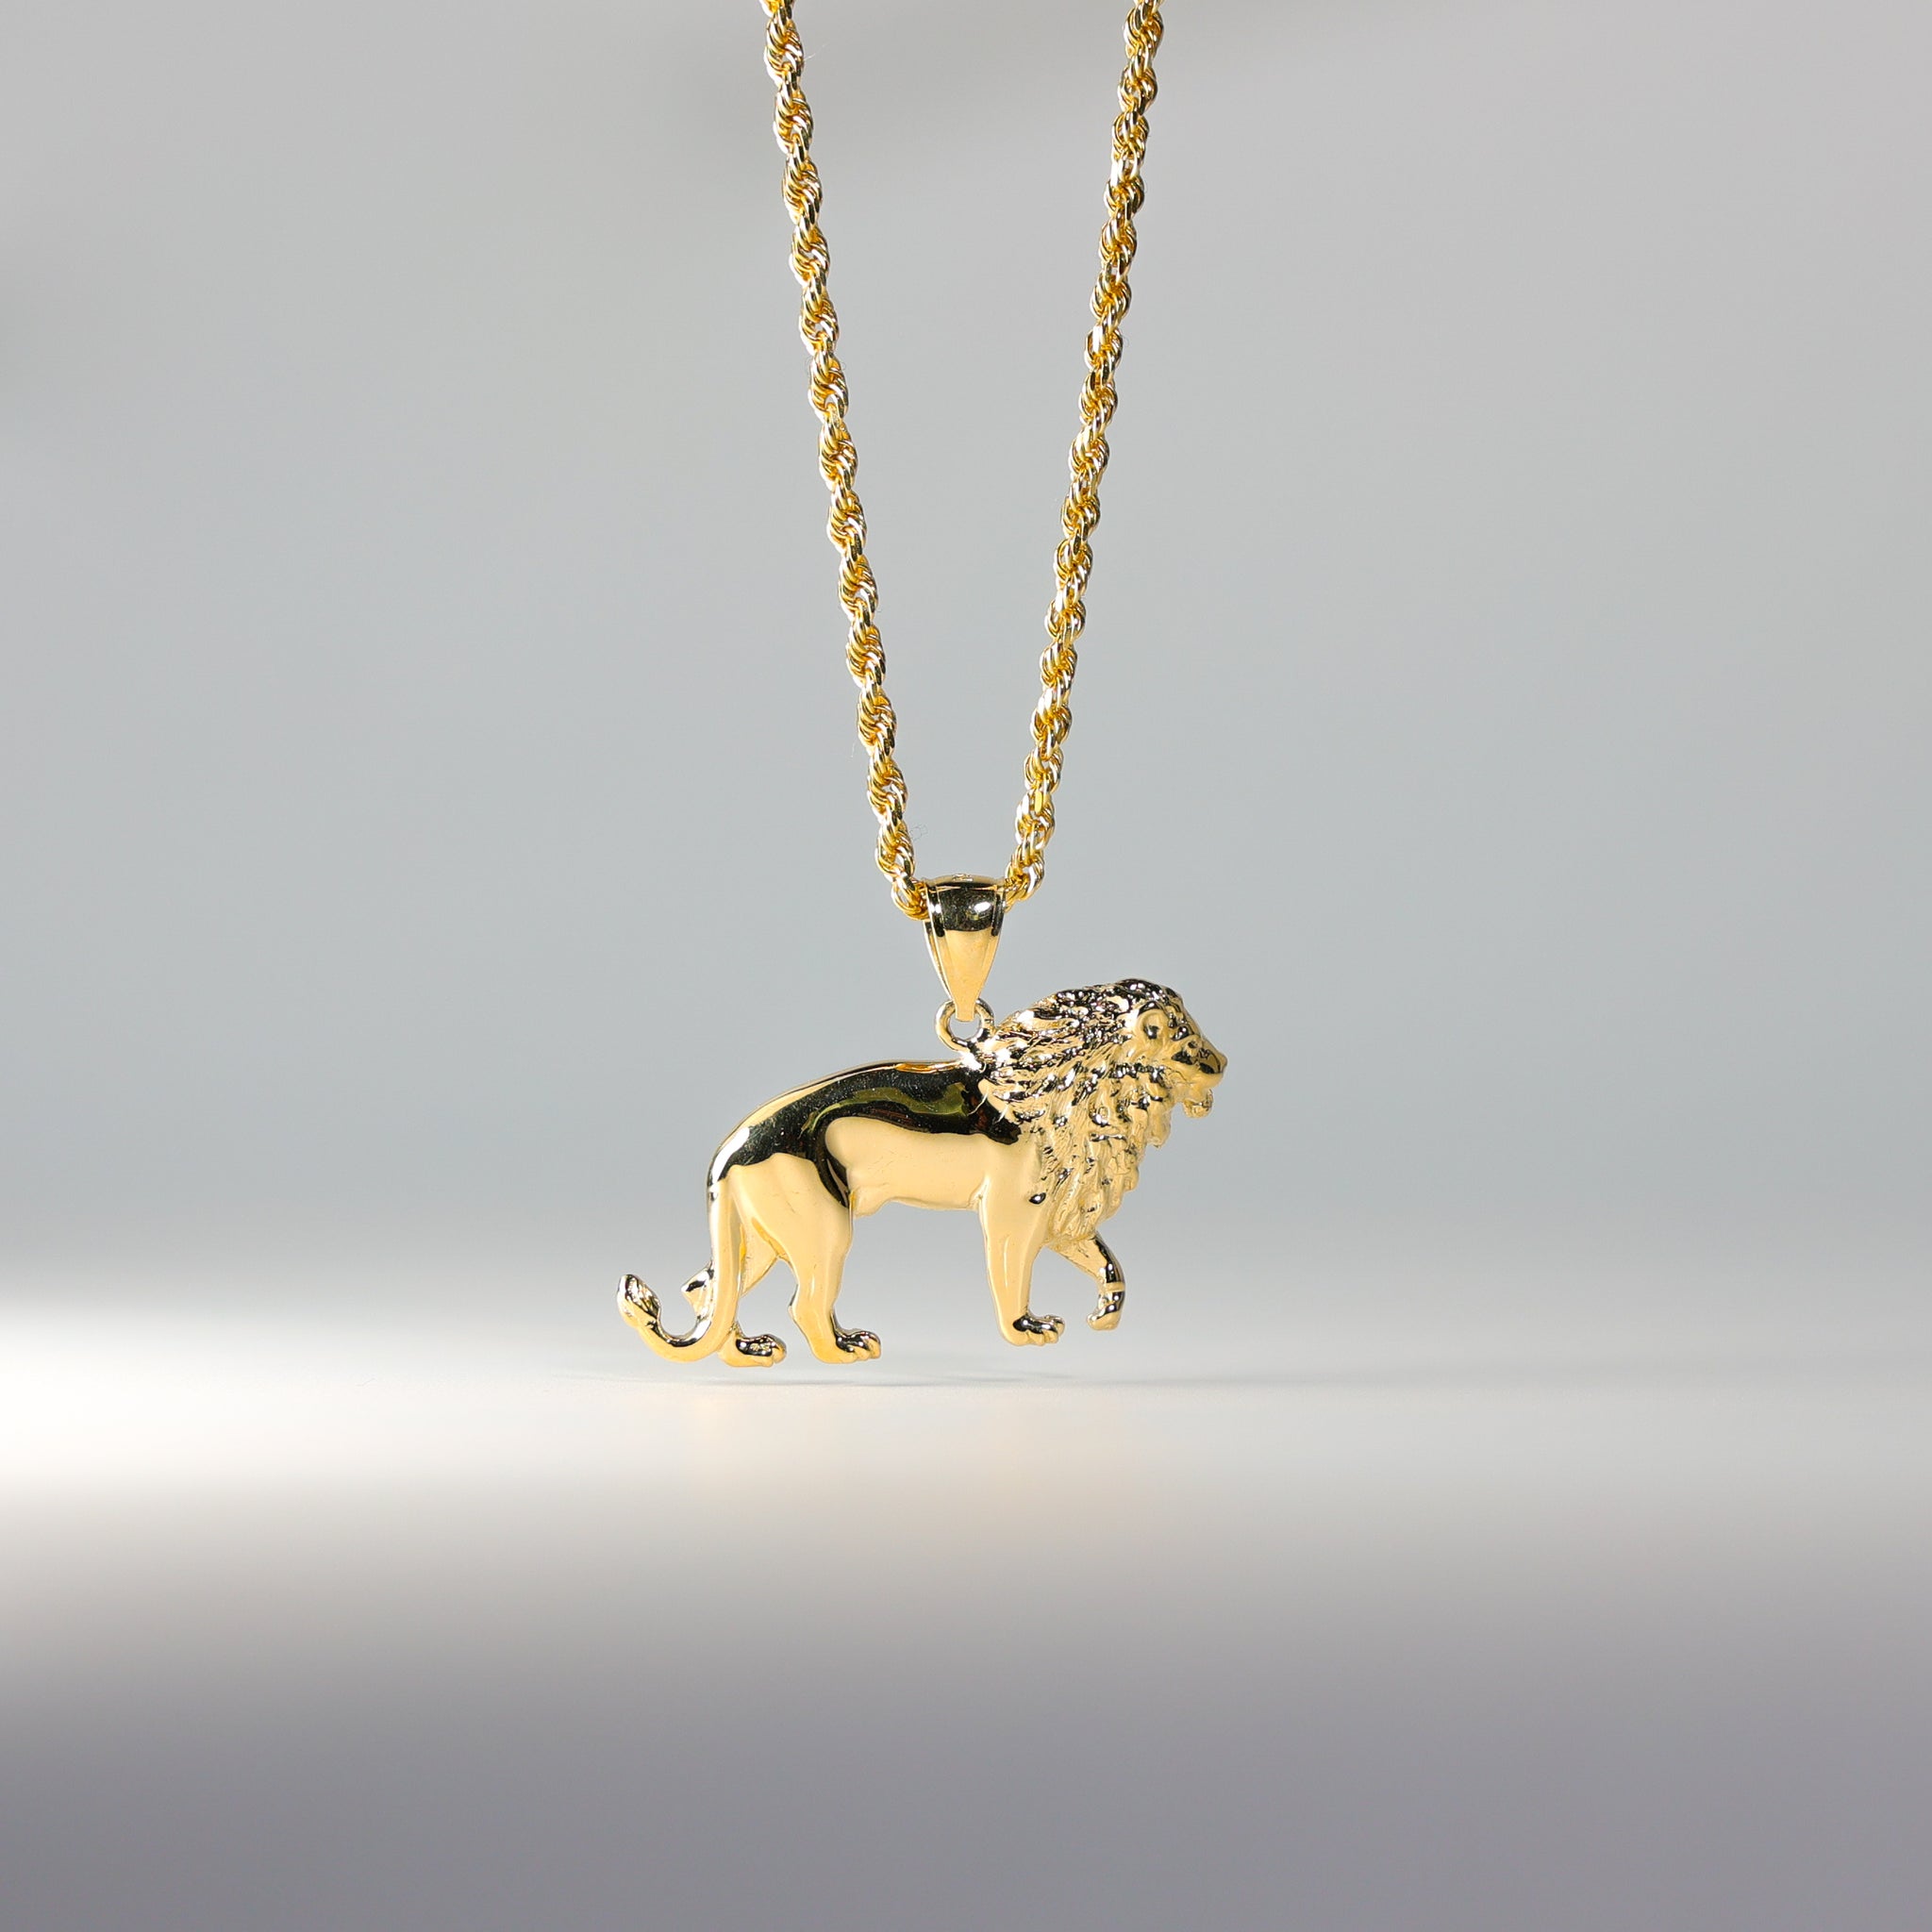 Gold lion Pendant Model-1619 - Charlie & Co. Jewelry